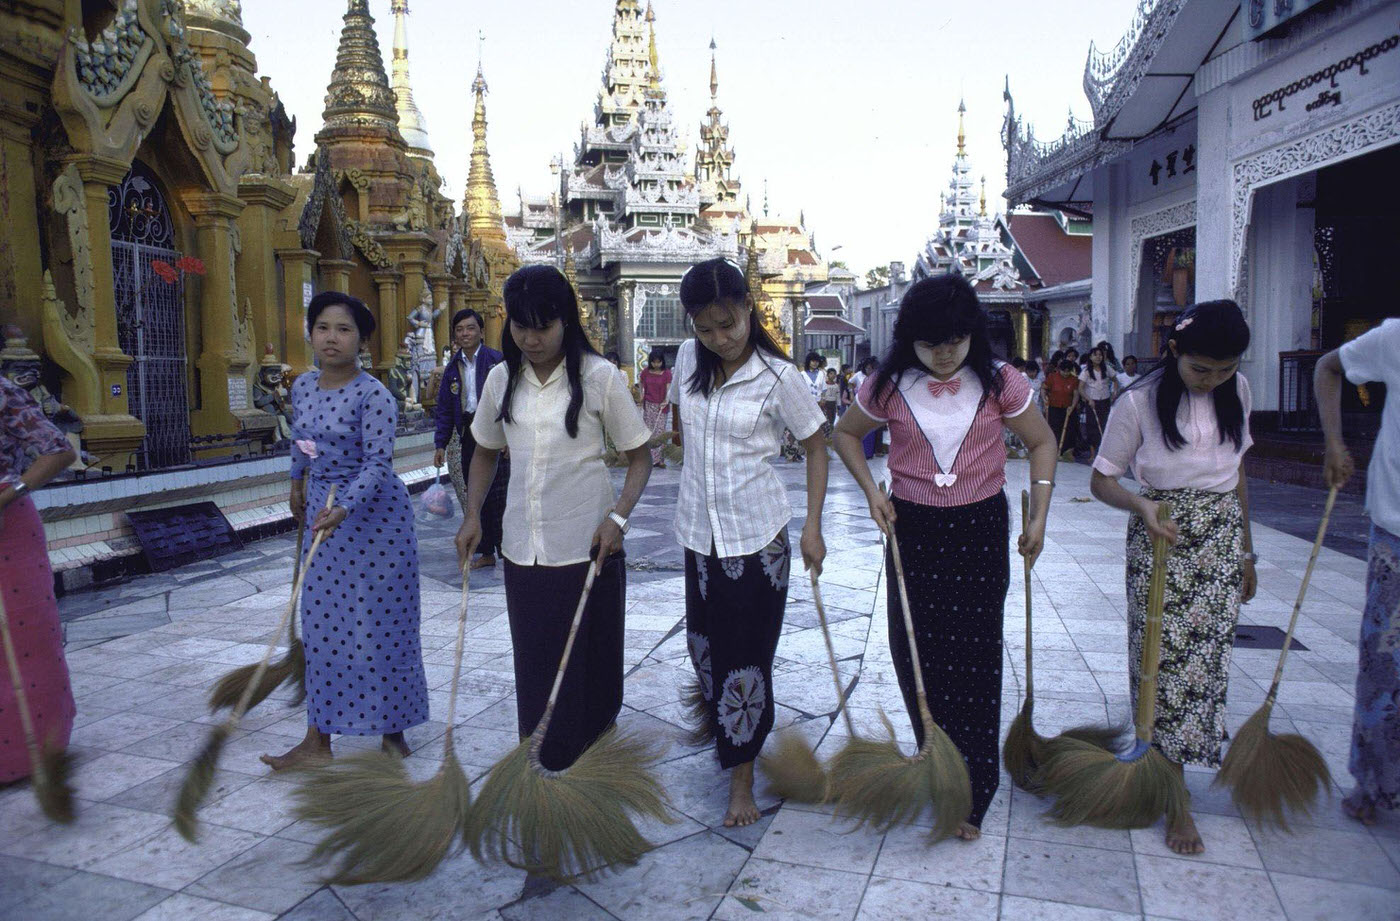 Barefooted Women Using Large Feather Dusters to Clean Sidewalk Outside of Shwe Dagon Pagoda